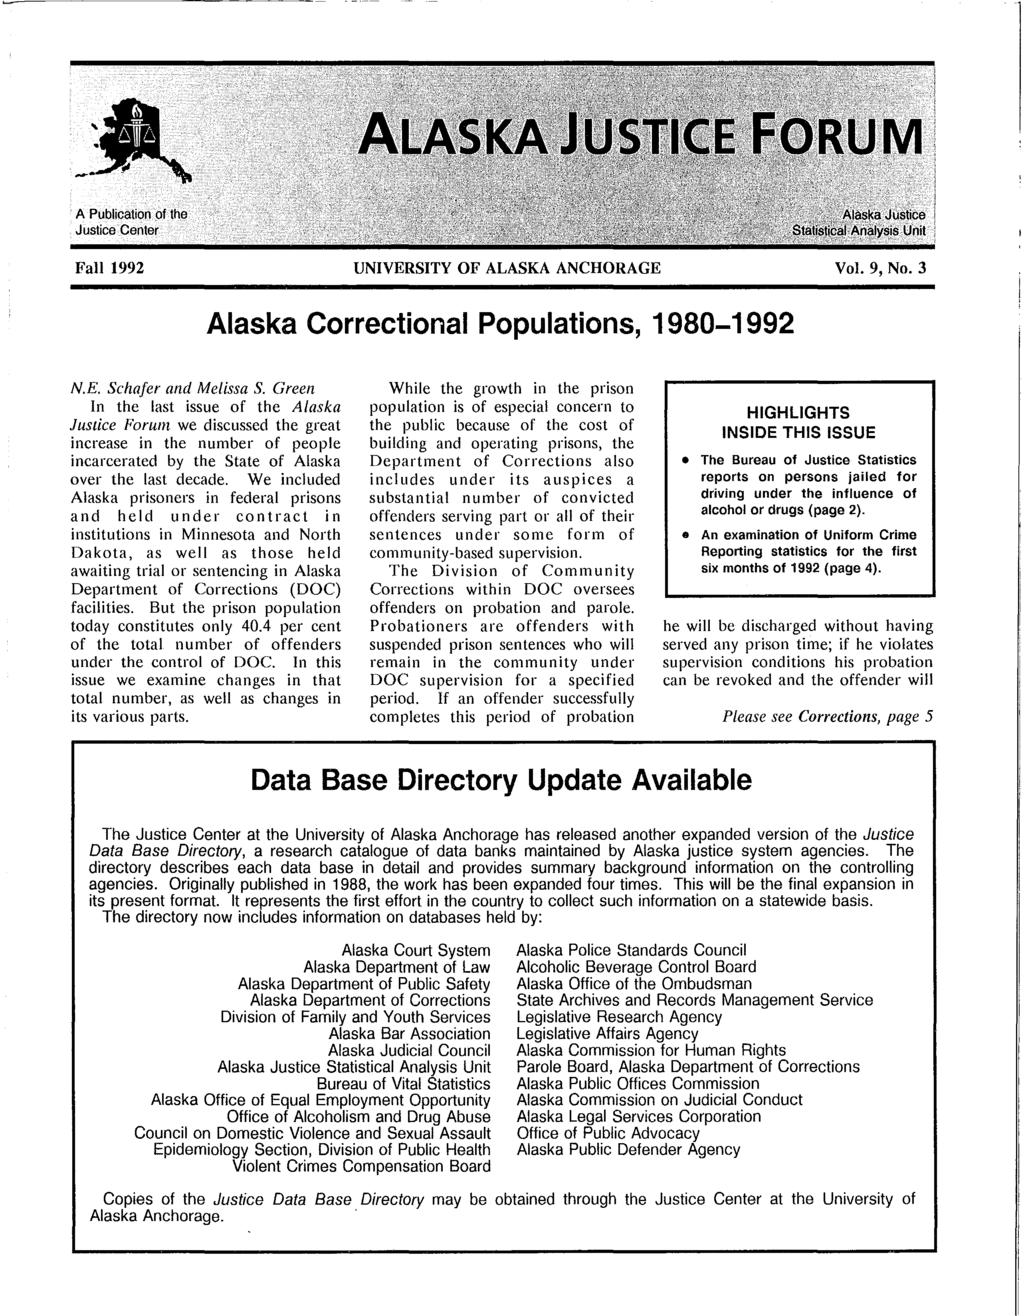 -. -~ A Publication.of the Justice Center Fall 1992 UNIVERSITY OF ALASKA ANCHORAGE Vol. 9, No. 3 Alaska Correctional Populations, 1980-1992 N.E. Schafer and Melissa S.